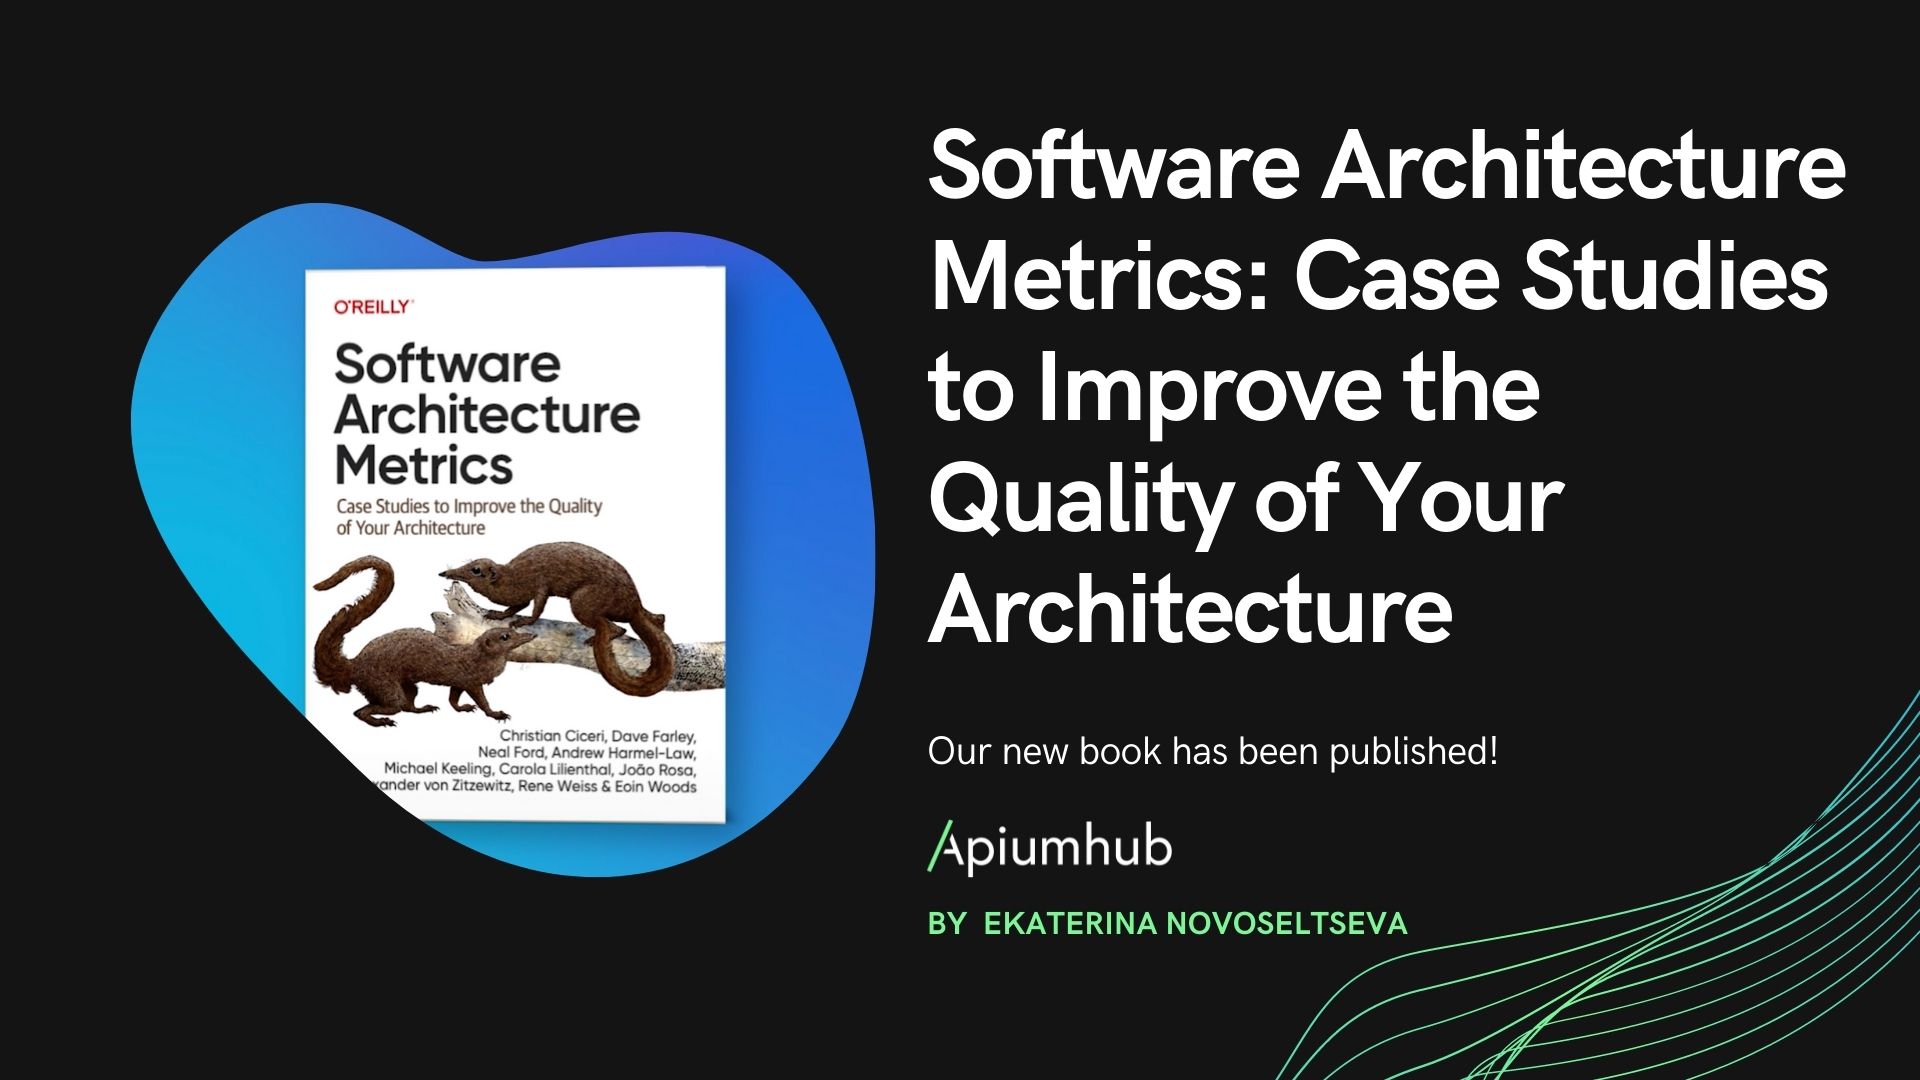 Our book "Software Architecture Metrics: Case Studies to Improve the Quality of Your Architecture" is published!